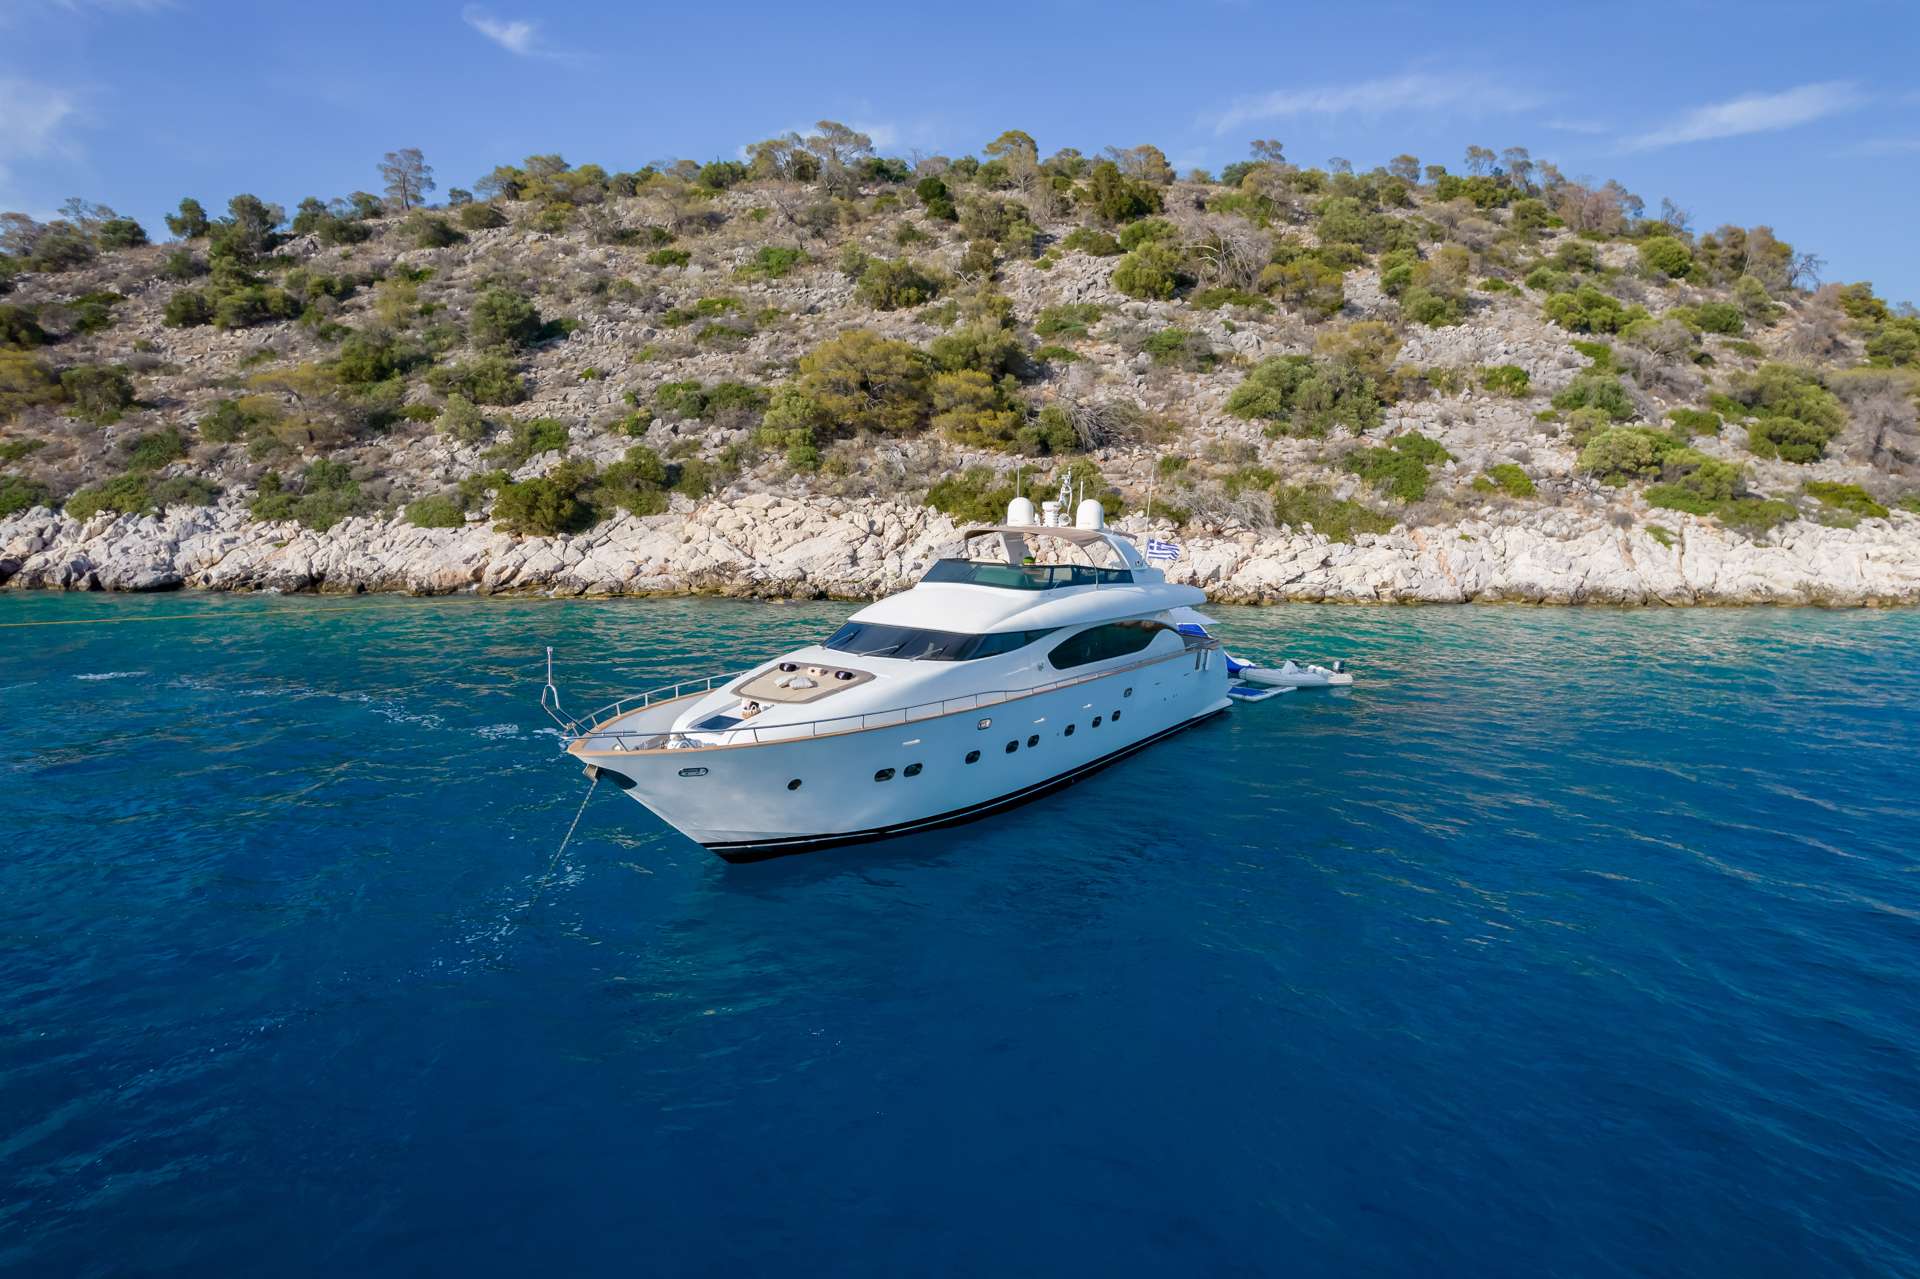 COOKIE - Yacht Charter Neos Marmaras & Boat hire in Greece & Turkey 1